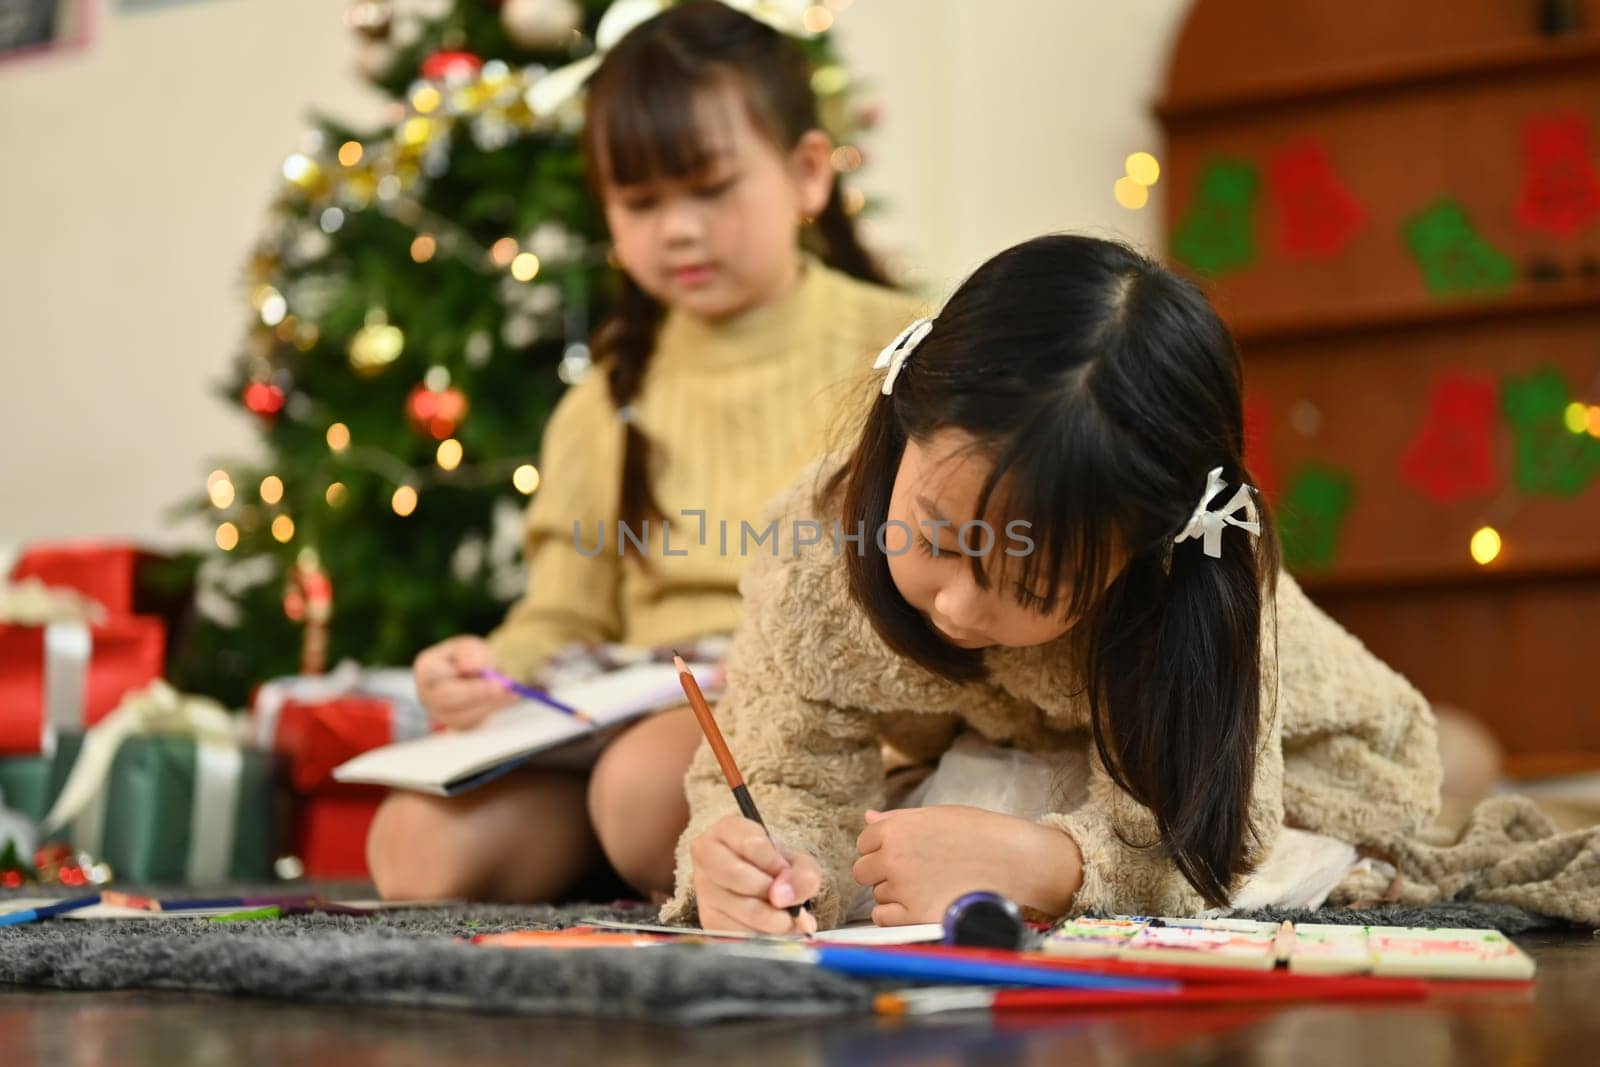 Adorable little girl making greeting card for New Year and Christmas while lying on carpet in decorated living room.